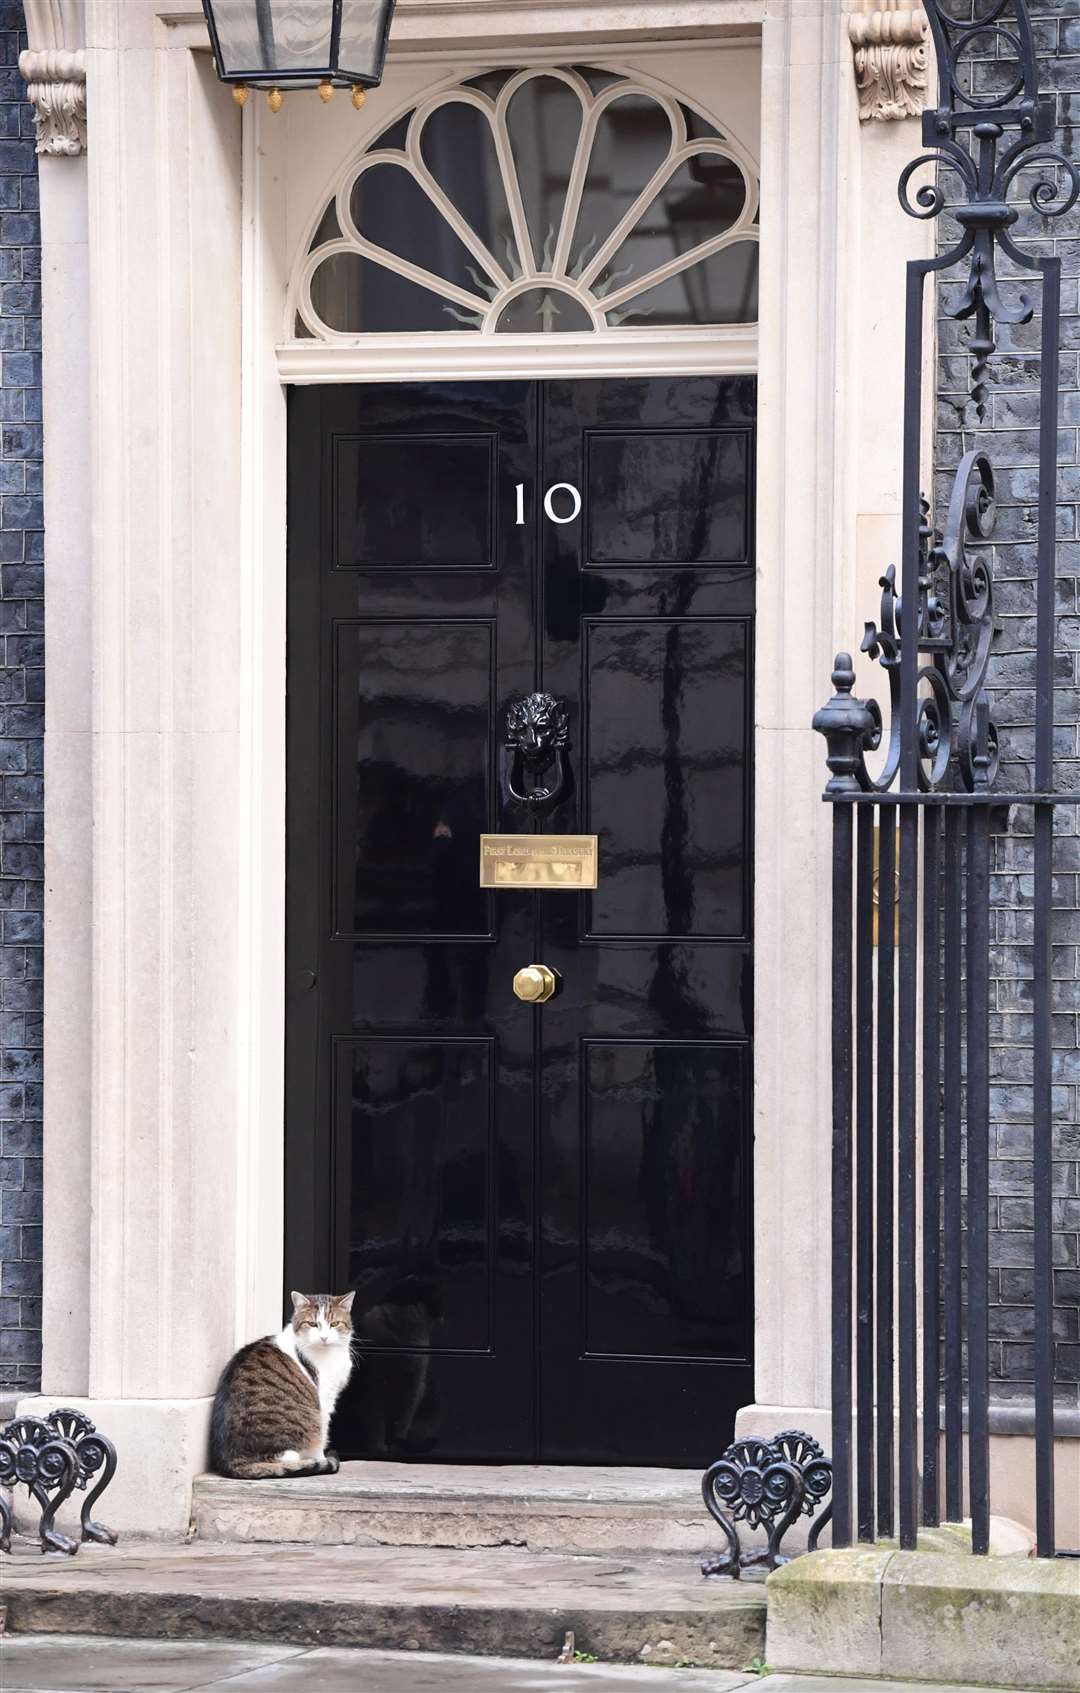 Larry the cat waits outside Number 10 Downing Street (Ian West/PA)